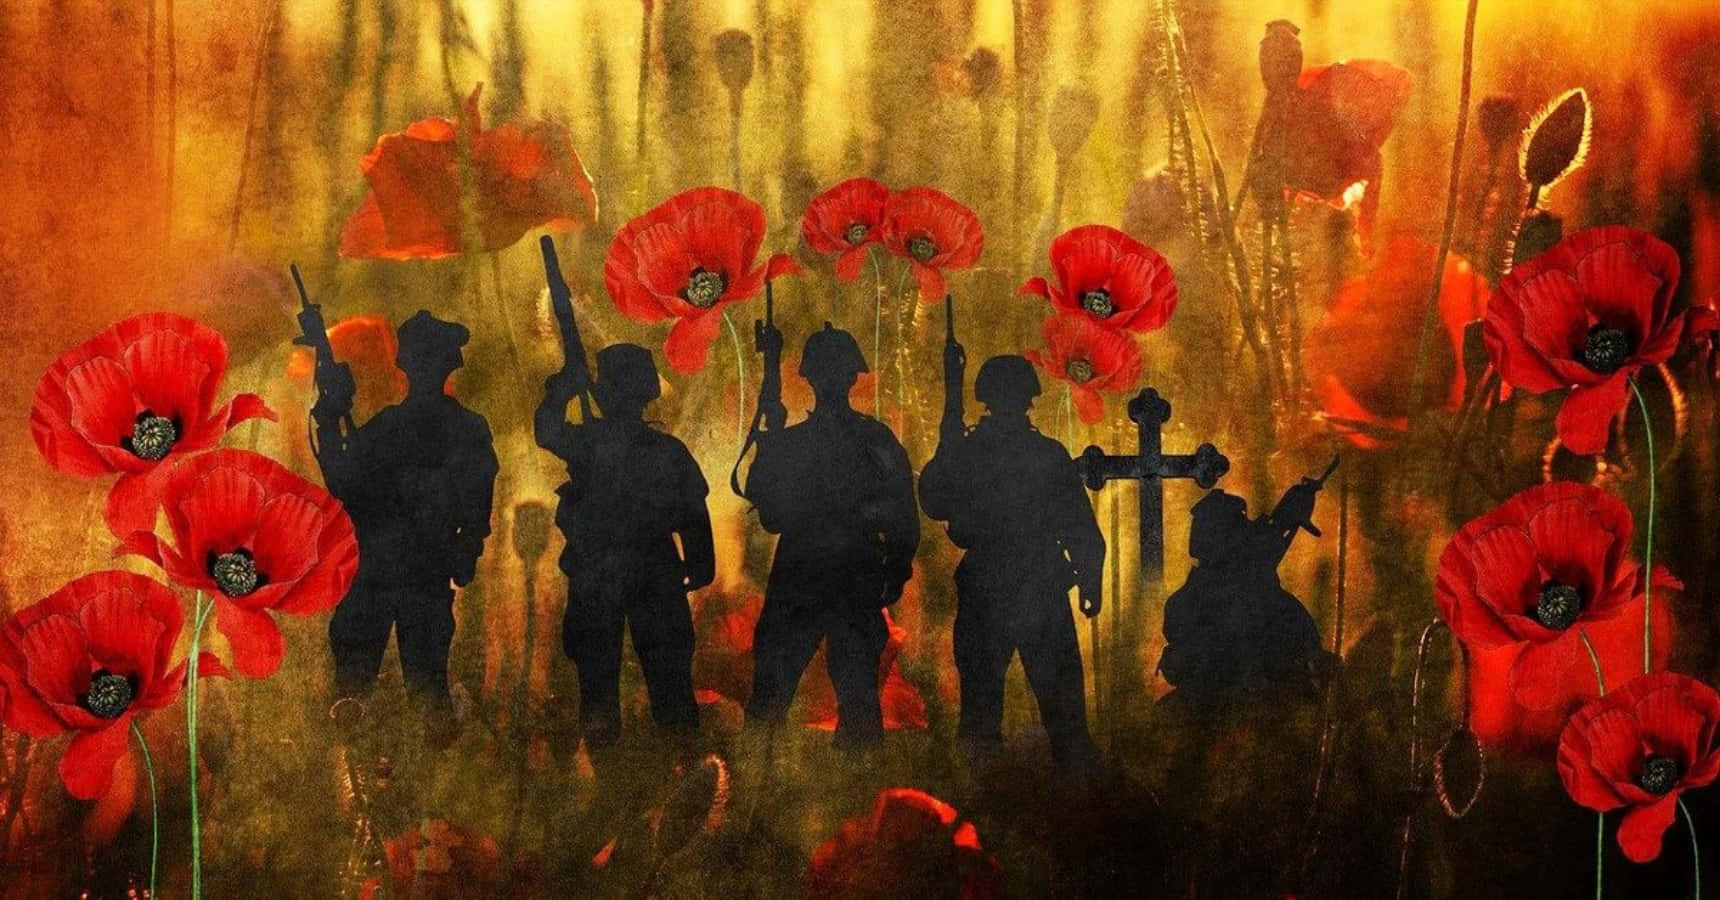 A Group Of Soldiers In Silhouette With Poppy Flowers